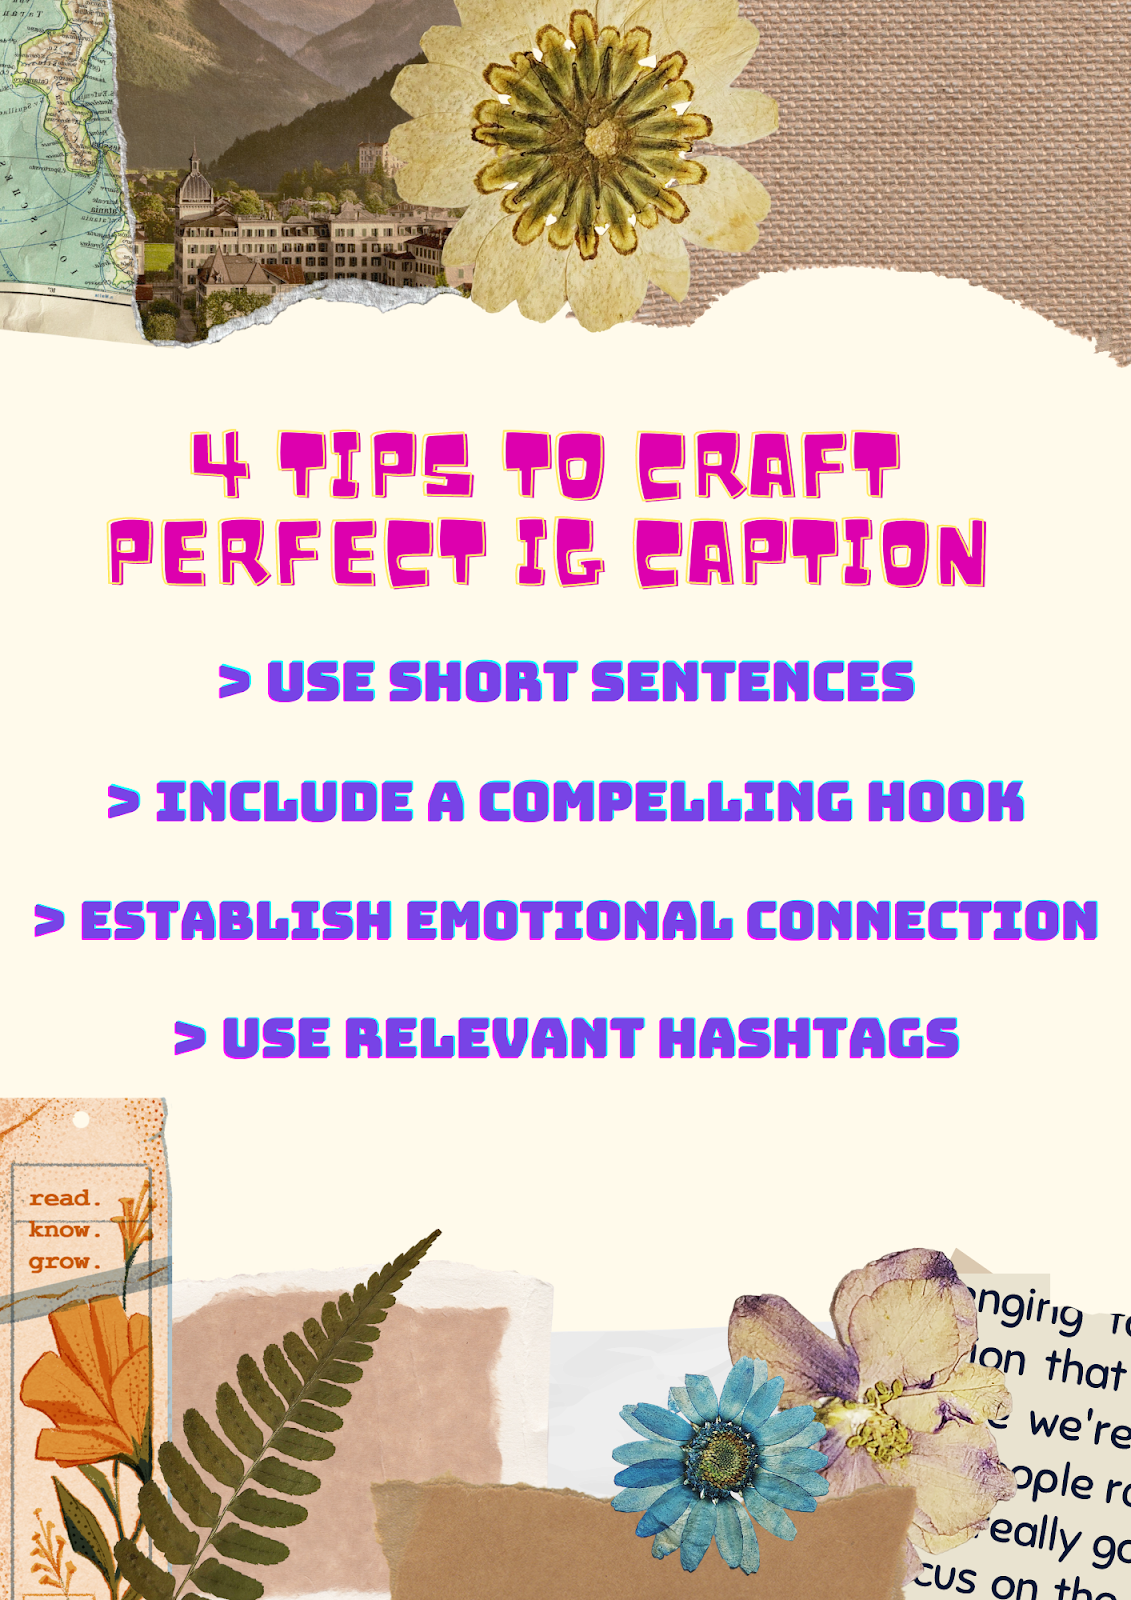 Perfect Tips to Craft an IG Caption